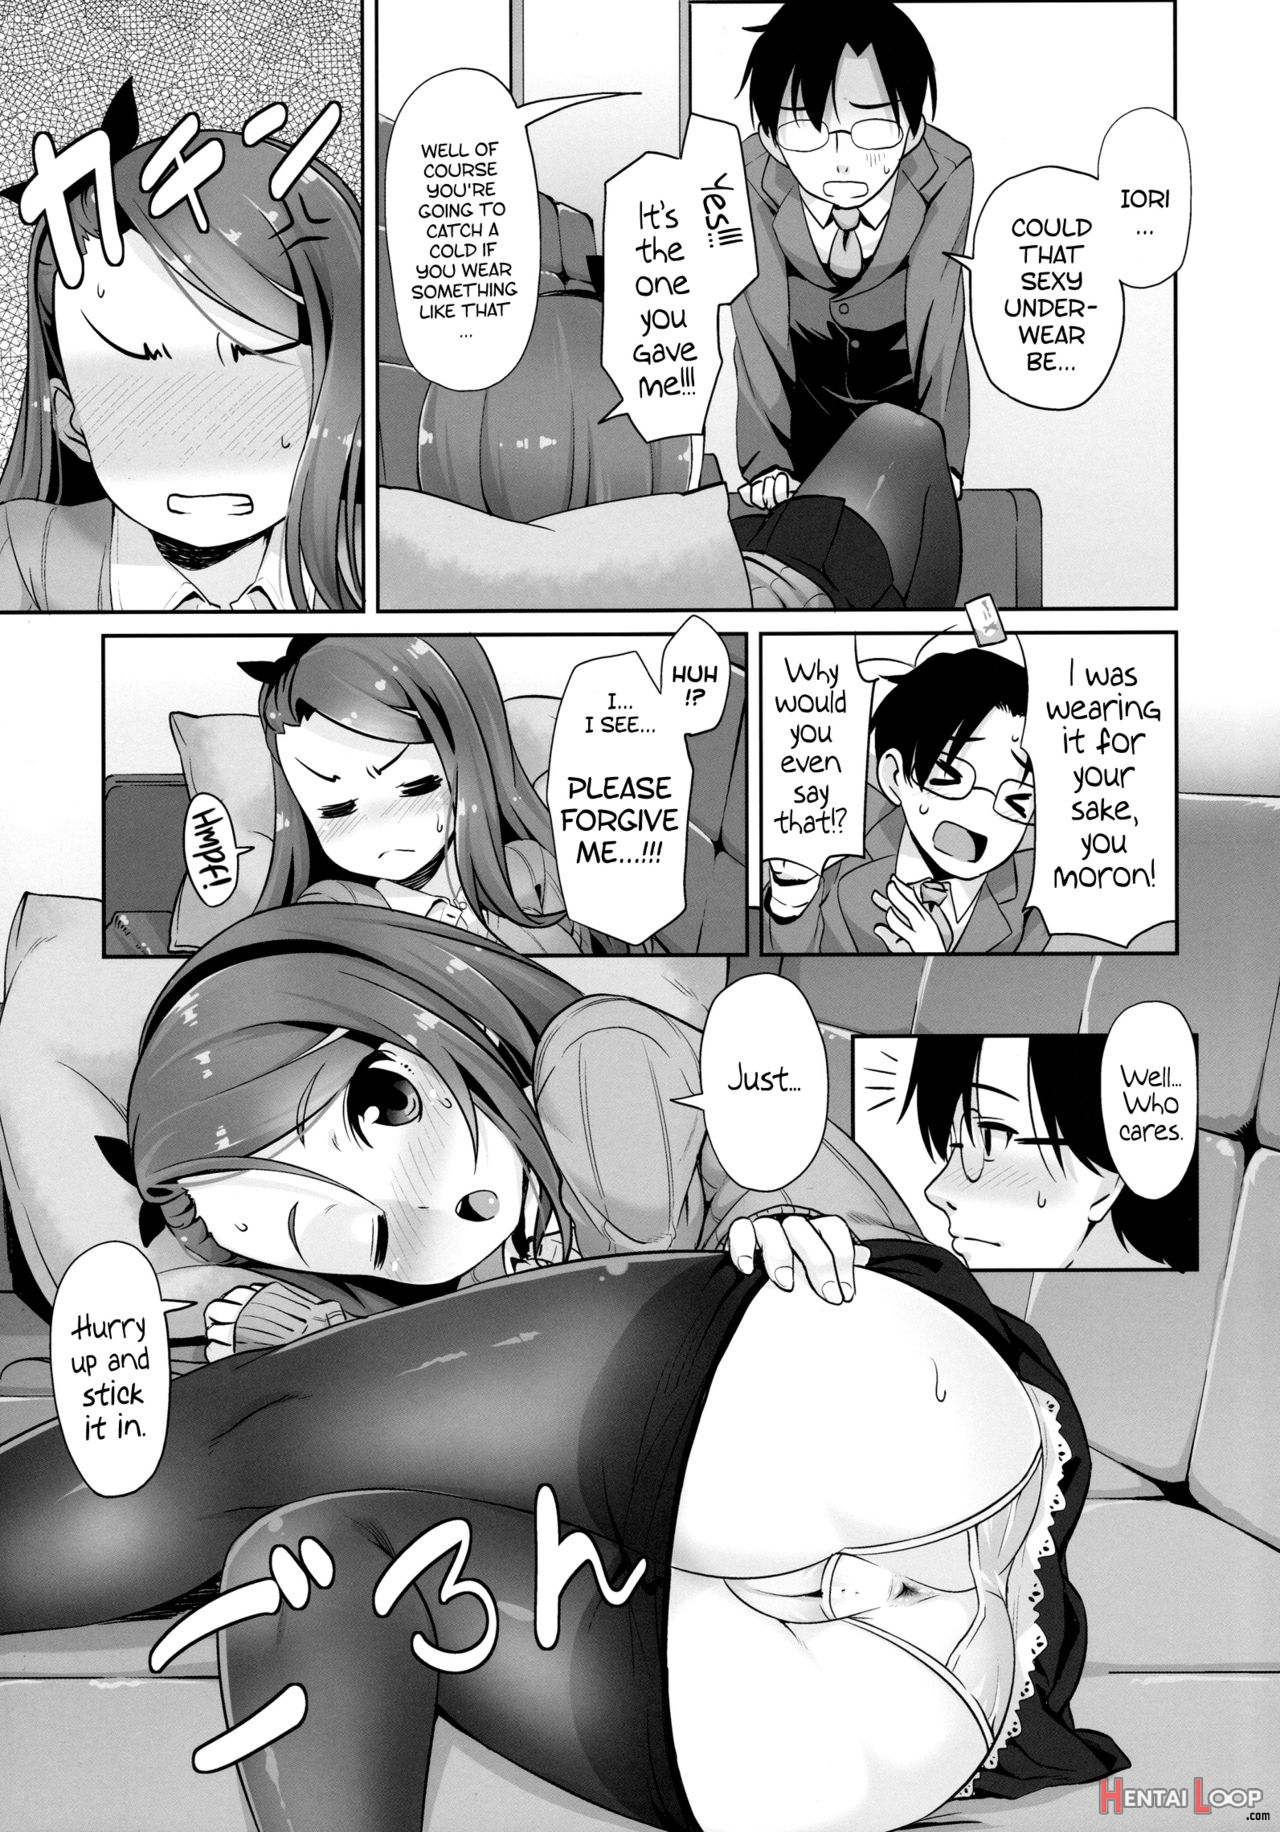 Iorix Fever page 4